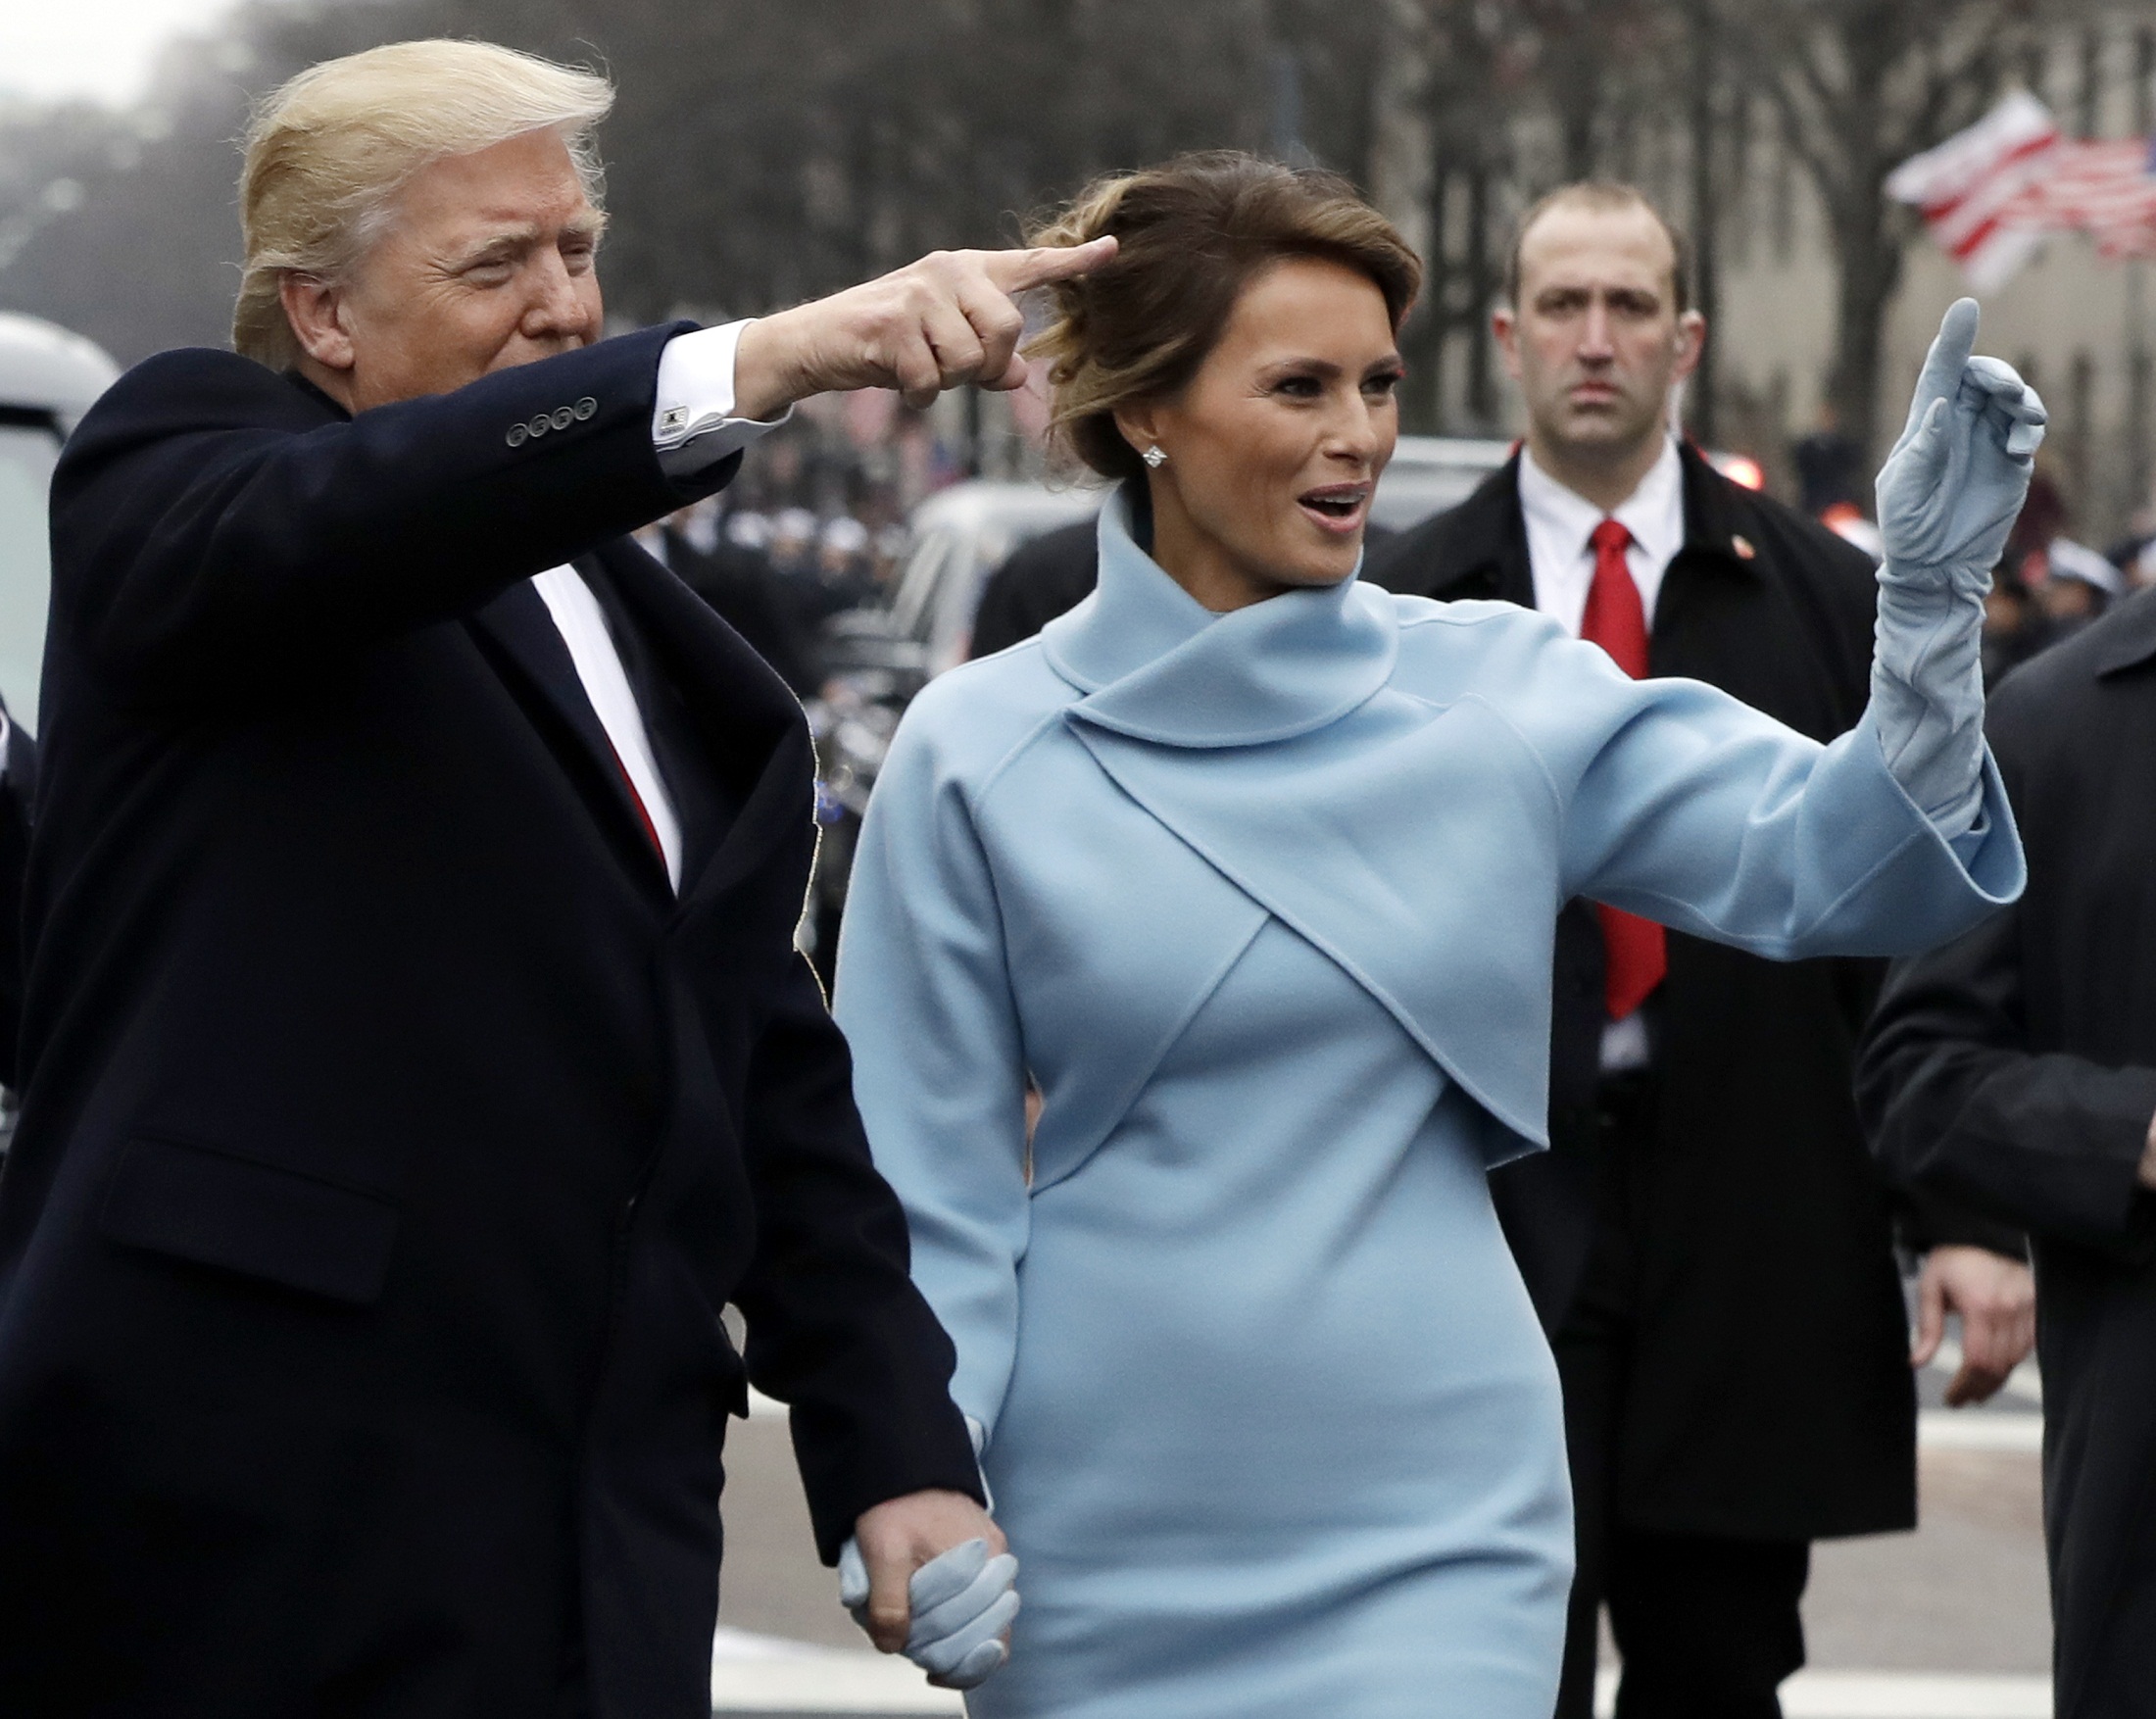 President Donald Trump waves as he walks with first lady melania Trump during the inauguration parade on Pennsylvania Avenue in Washington, DC, on January 20, 2107 following swearing-in ceremonies on Capitol Hill earlier today.  / AFP PHOTO / POOL / Evan Vucci